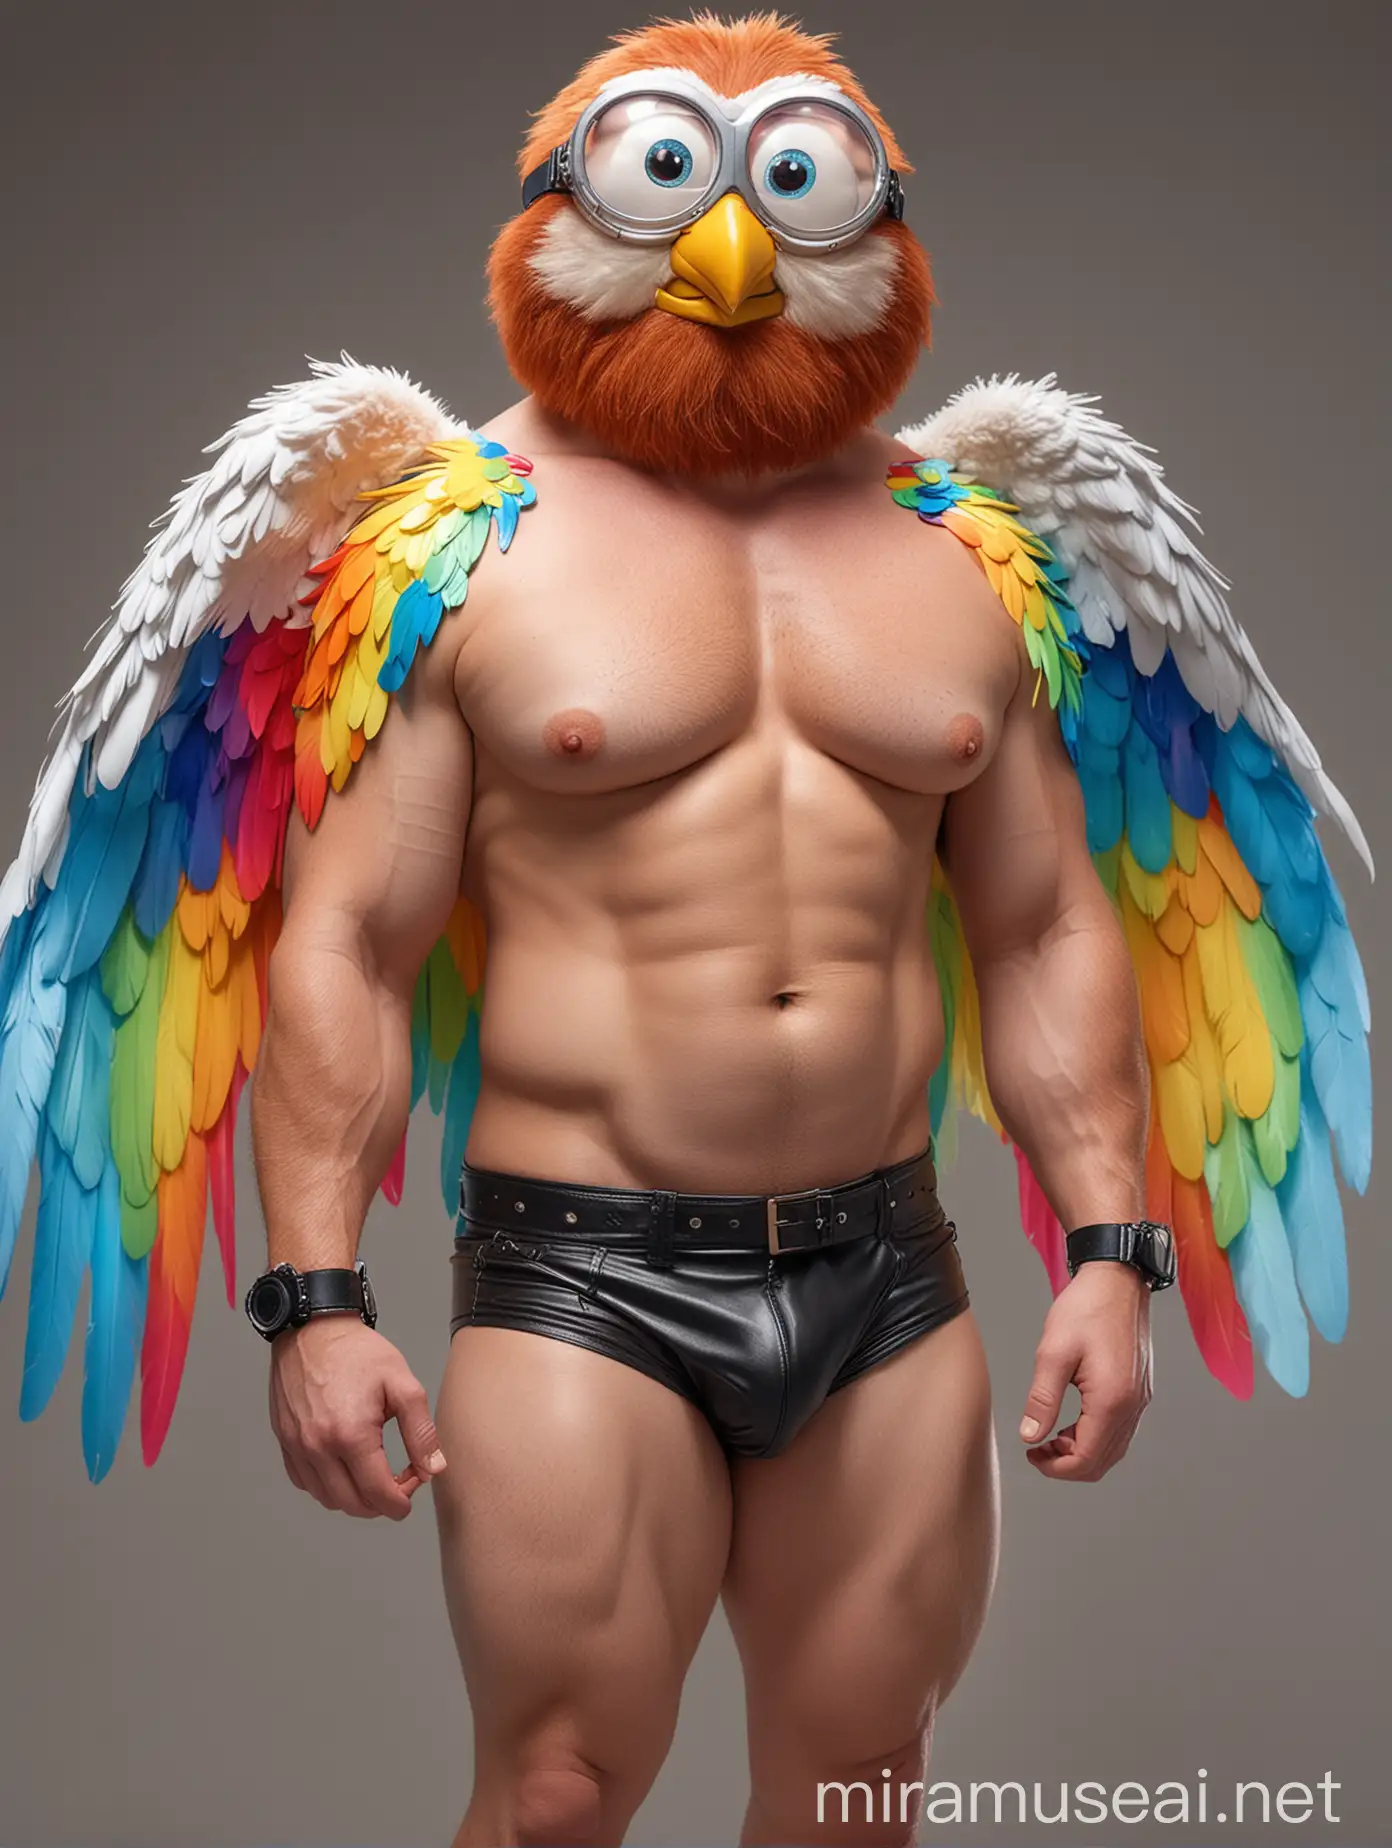 Studio Light Subtle Smile Topless 40s Ultra beefy Red Head Bodybuilder Daddy Big Eyes with Beard Wearing Multi-Highlighter Bright Rainbow Colored See Through huge Eagle Wings Shoulder Jacket short shorts low leather boots and Flexing his Big Strong Arm Up with Doraemon Goggles on forehead